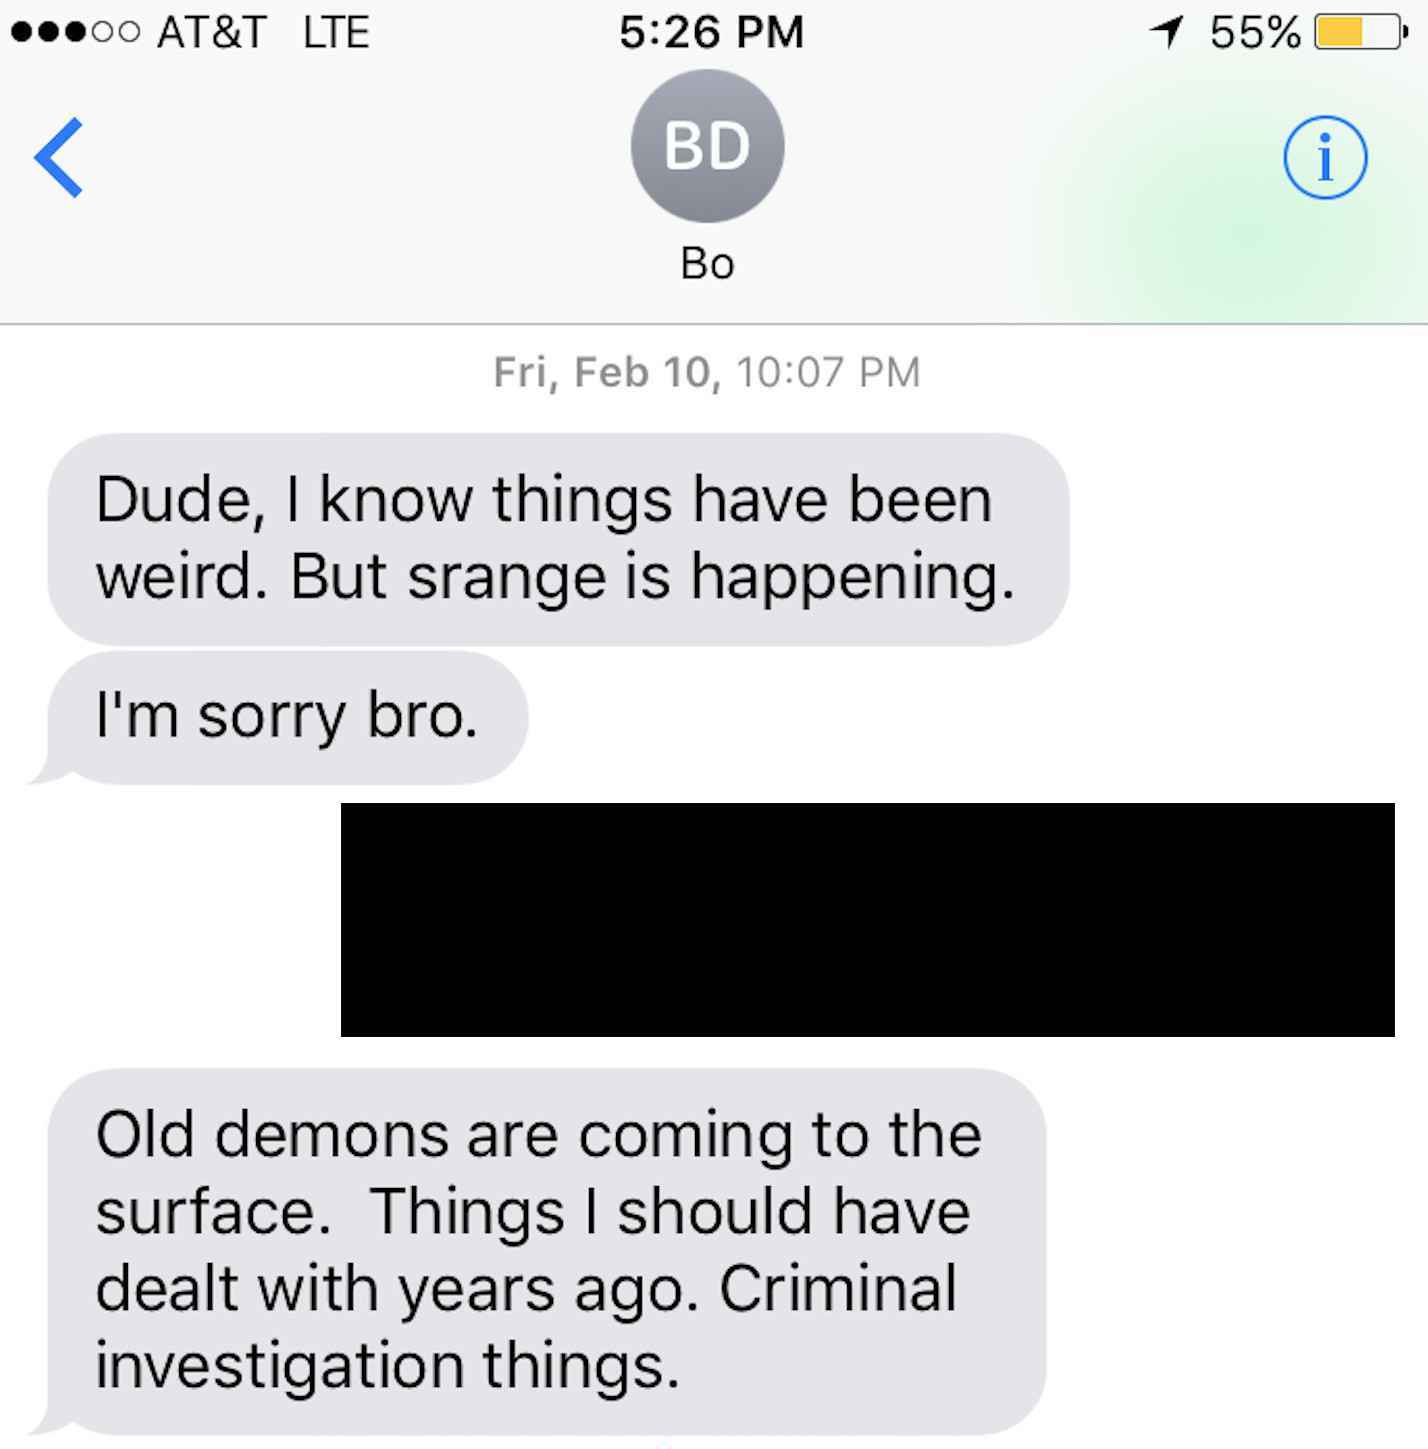 Text Messages from Bo Dukes